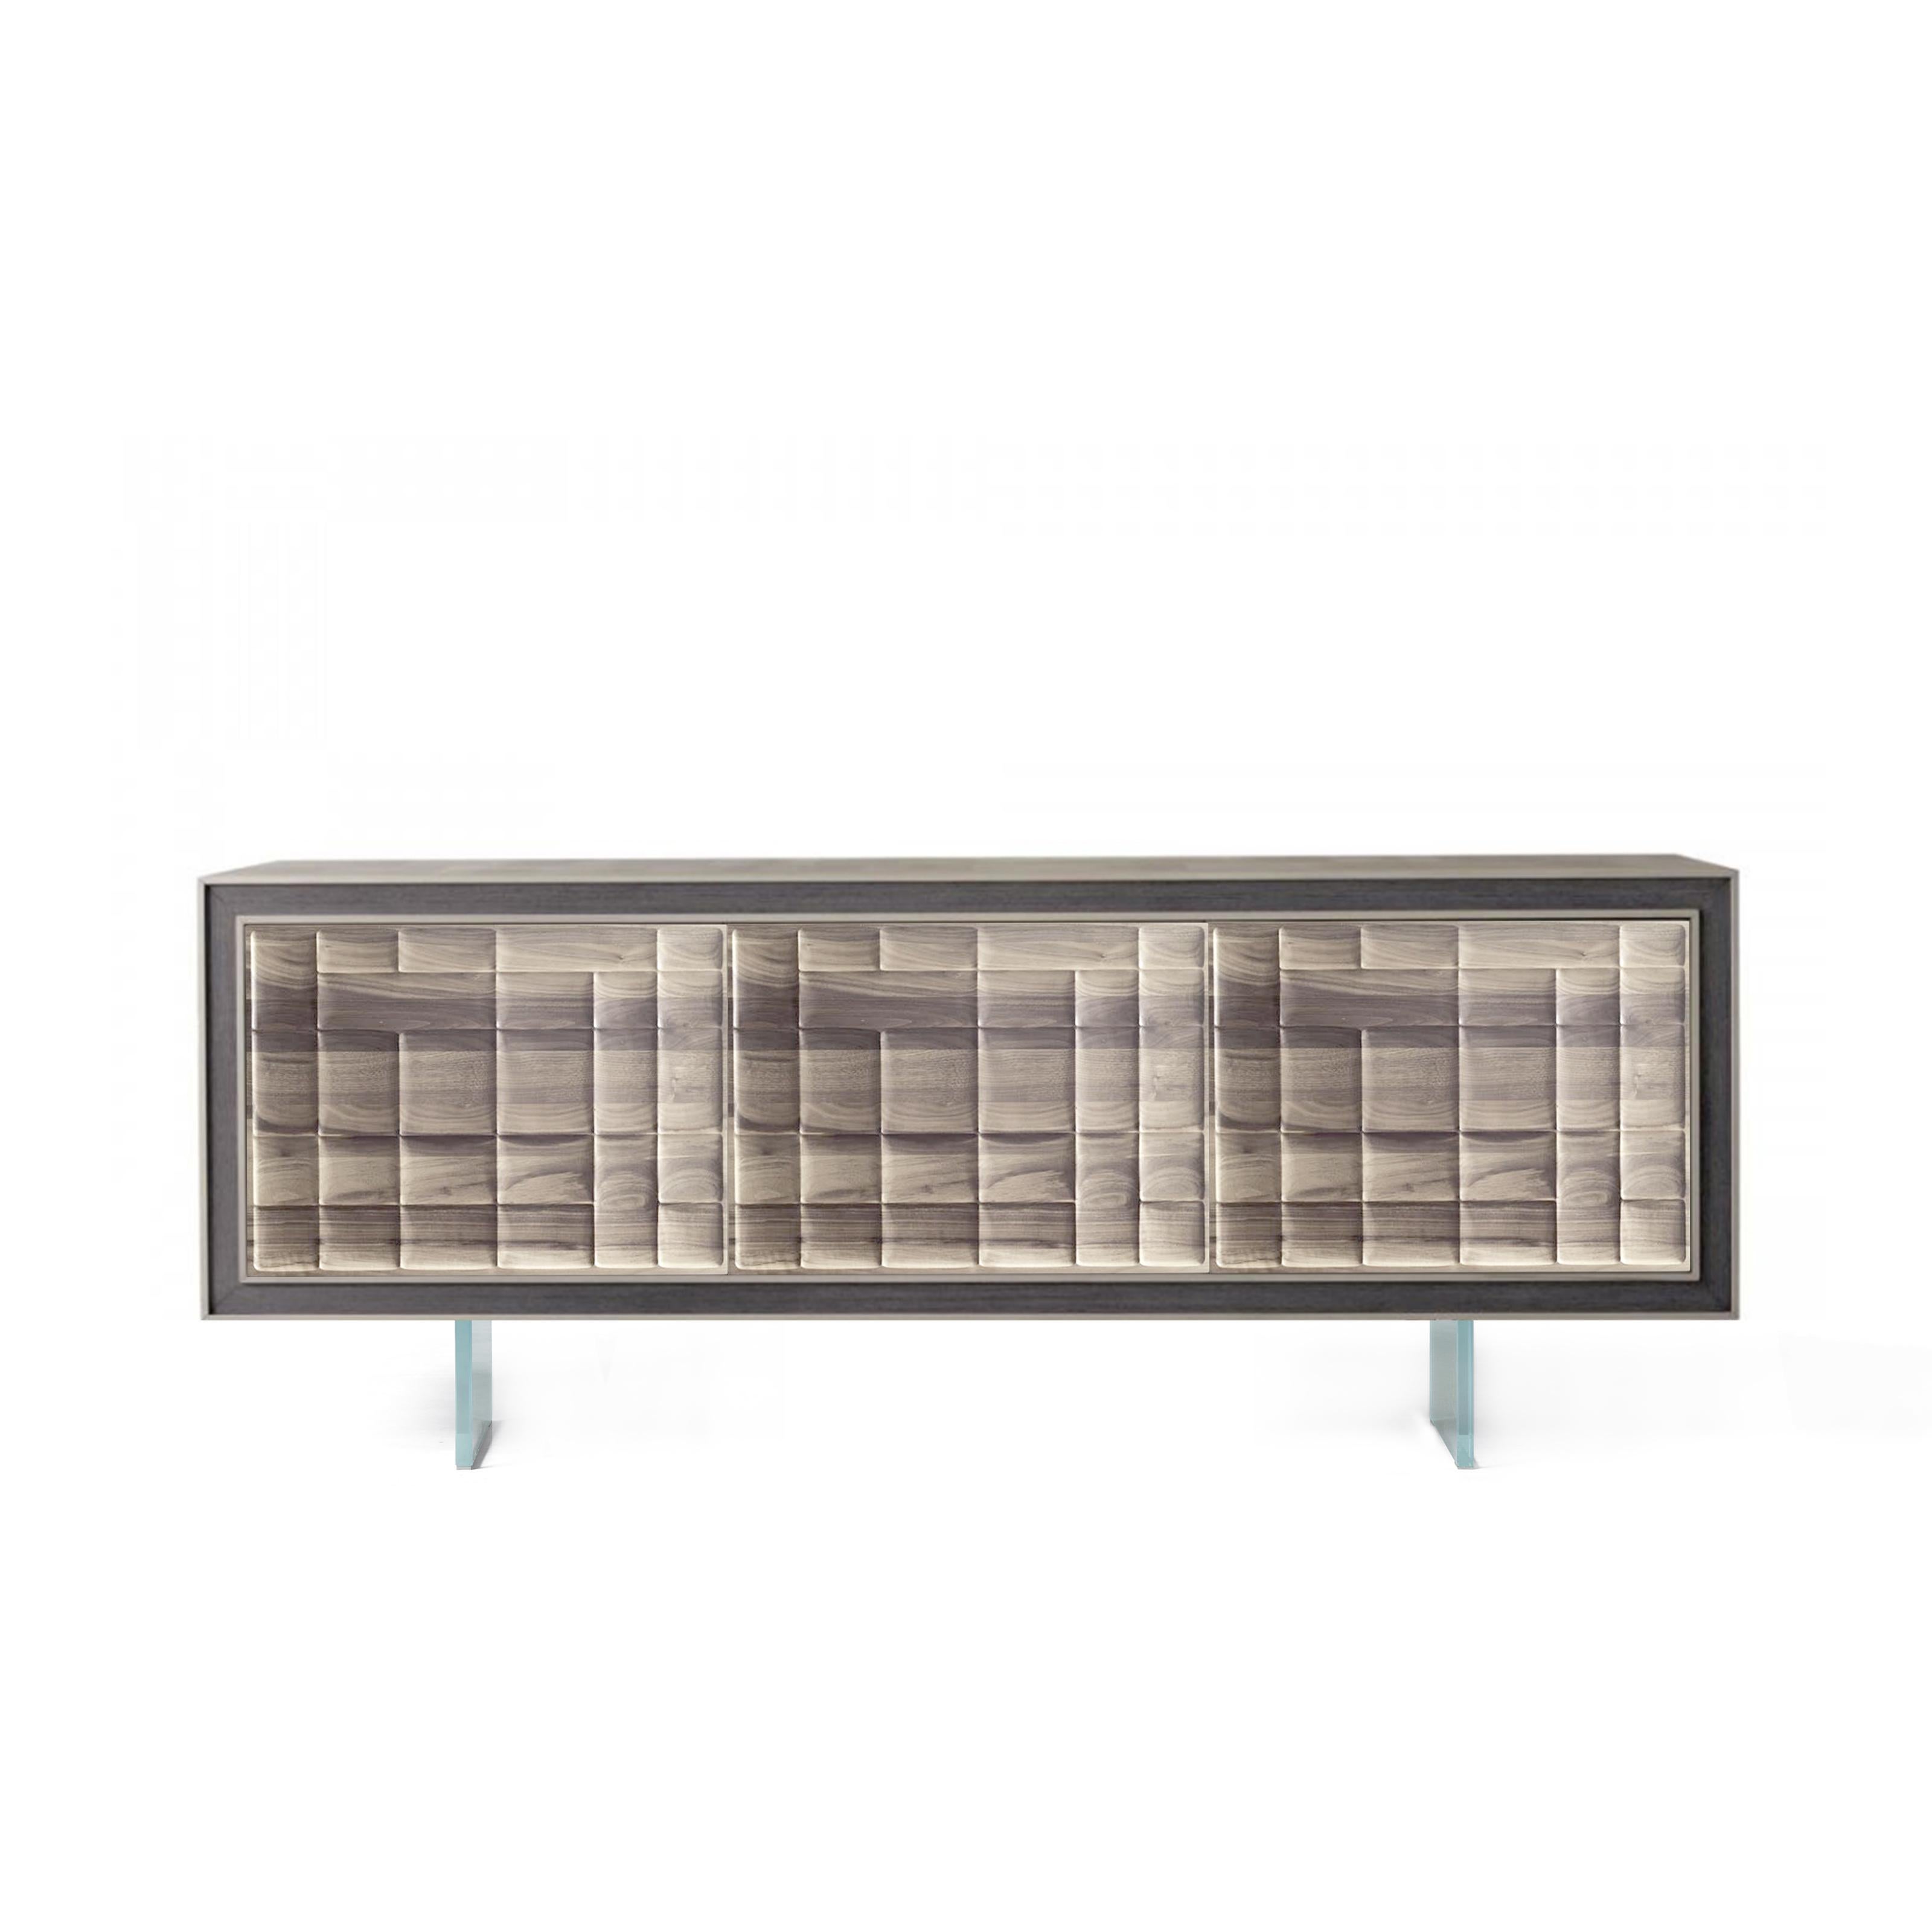 Quadra Scacco Solid Wood Sideboard, Walnut in Natural Grey Finish, Contemporary For Sale 1